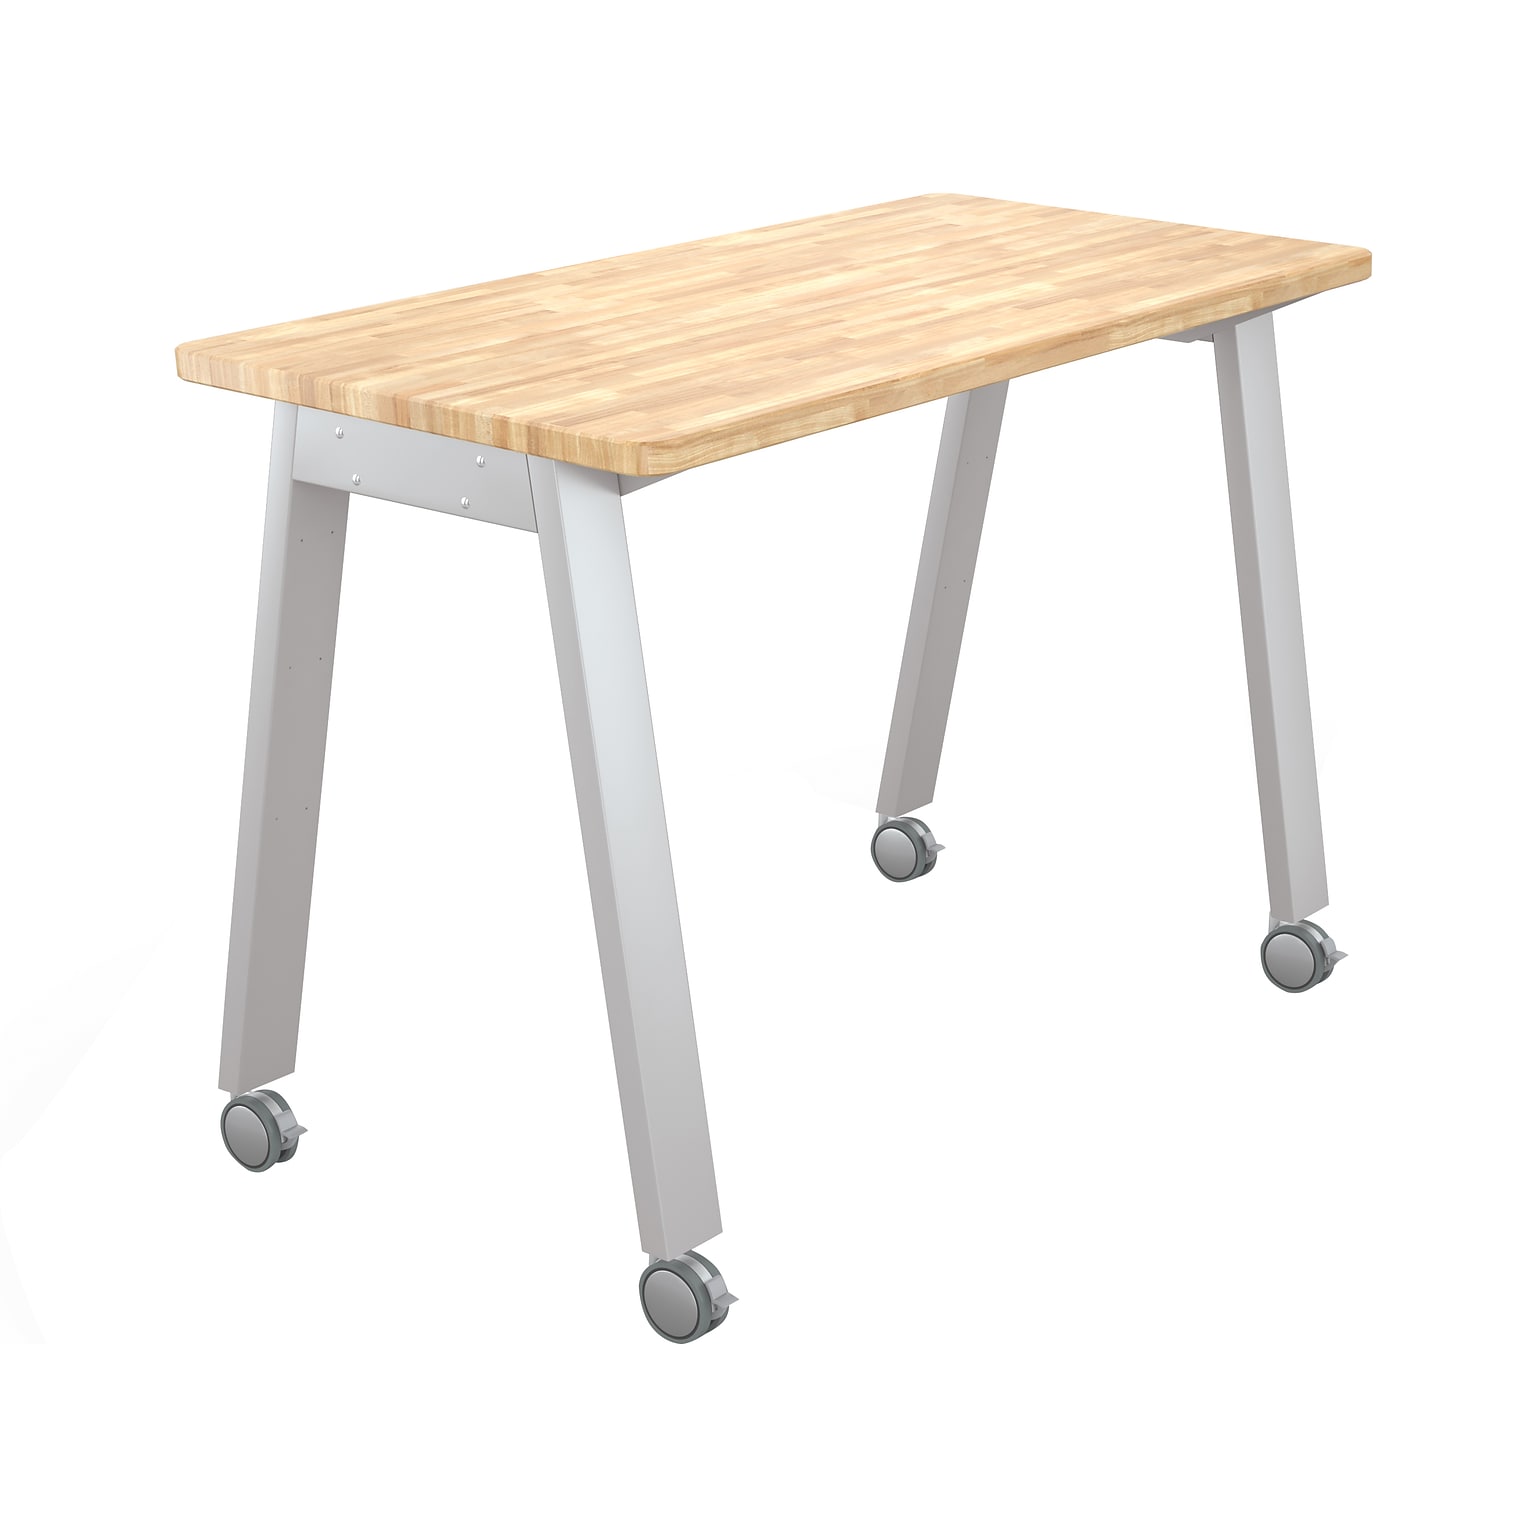 MooreCo Compass Makerspace 60 Table with Butcher Block, Beige/Platinum (91696-A-BUTCHER)